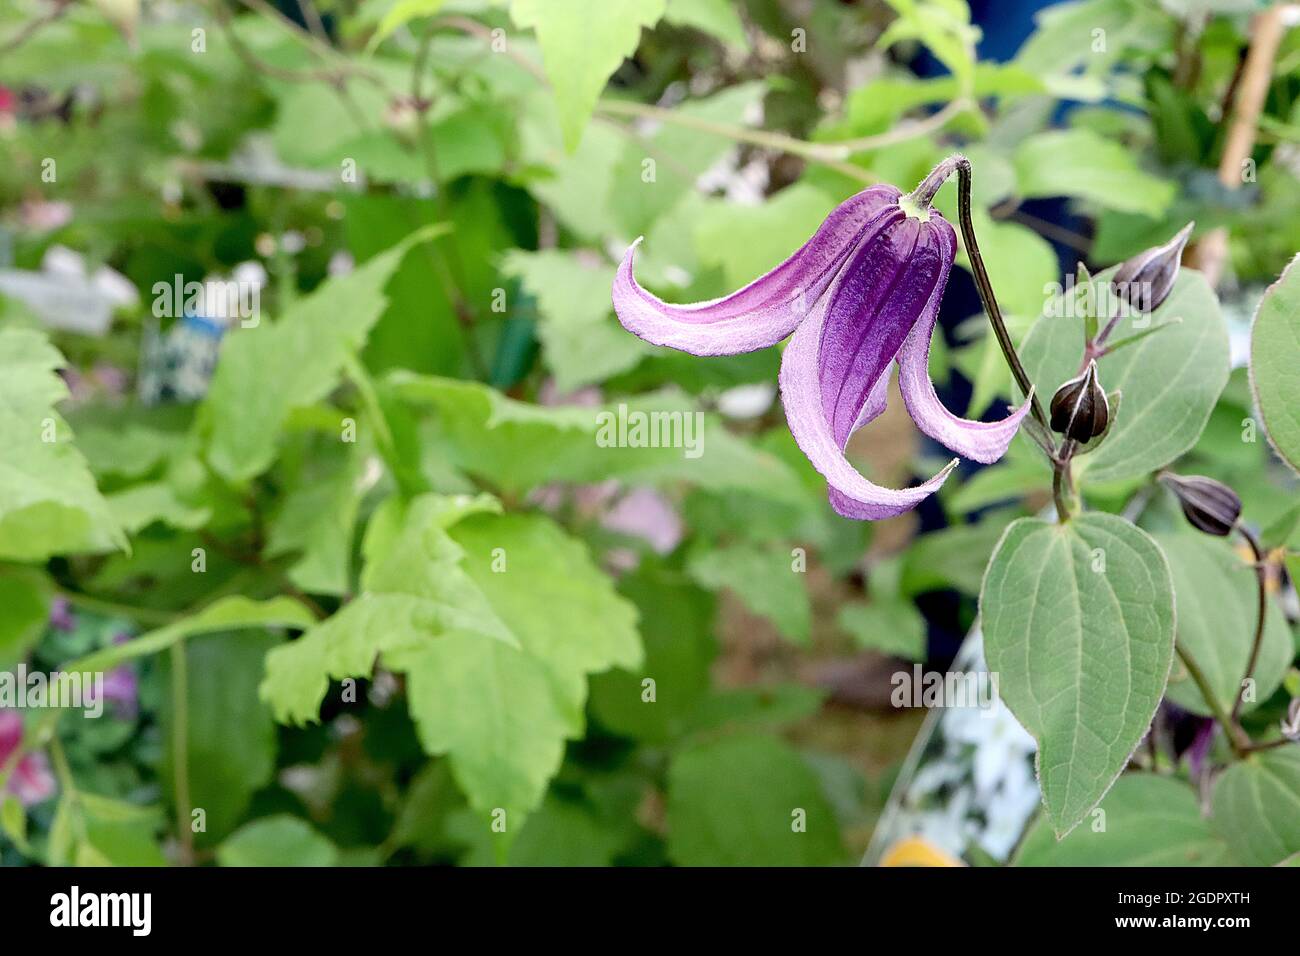 Clematis 'Fascination' shiny deep purple urn-shaped flowers with recurved  petals, July, England, UK Stock Photo - Alamy